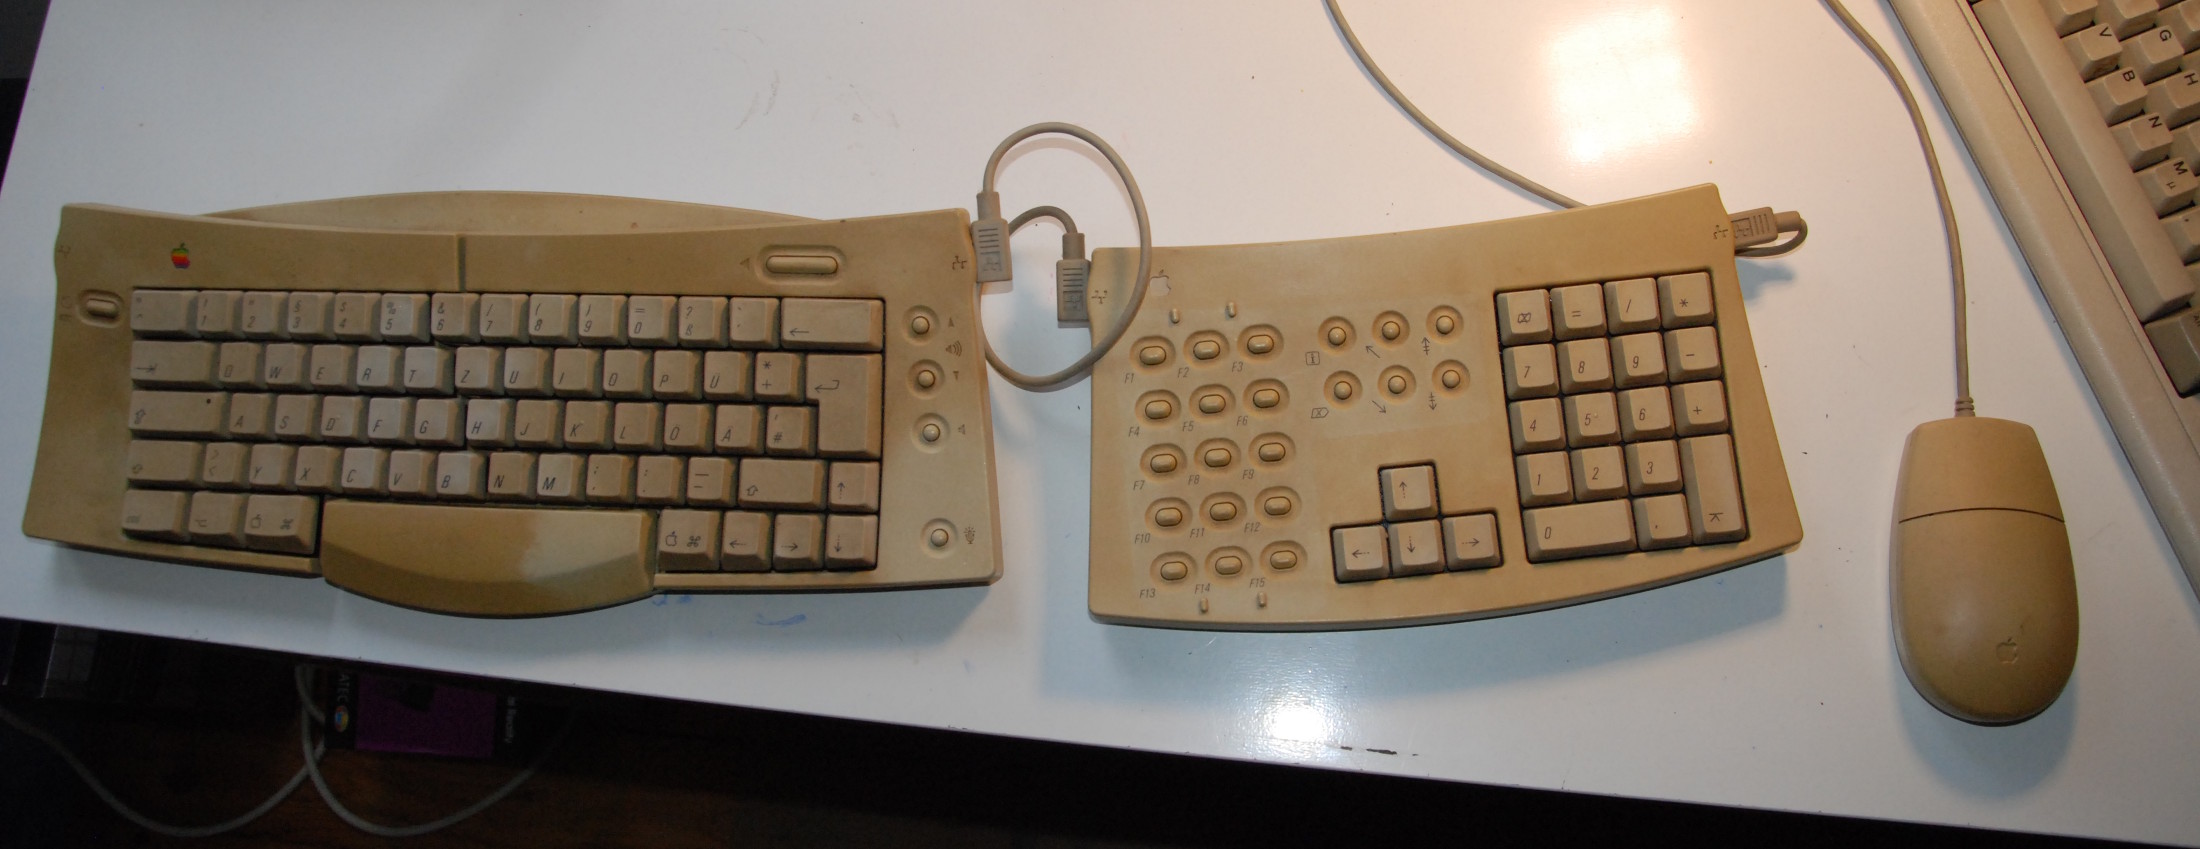 Apple M1242 with numpad and mouse, white alps